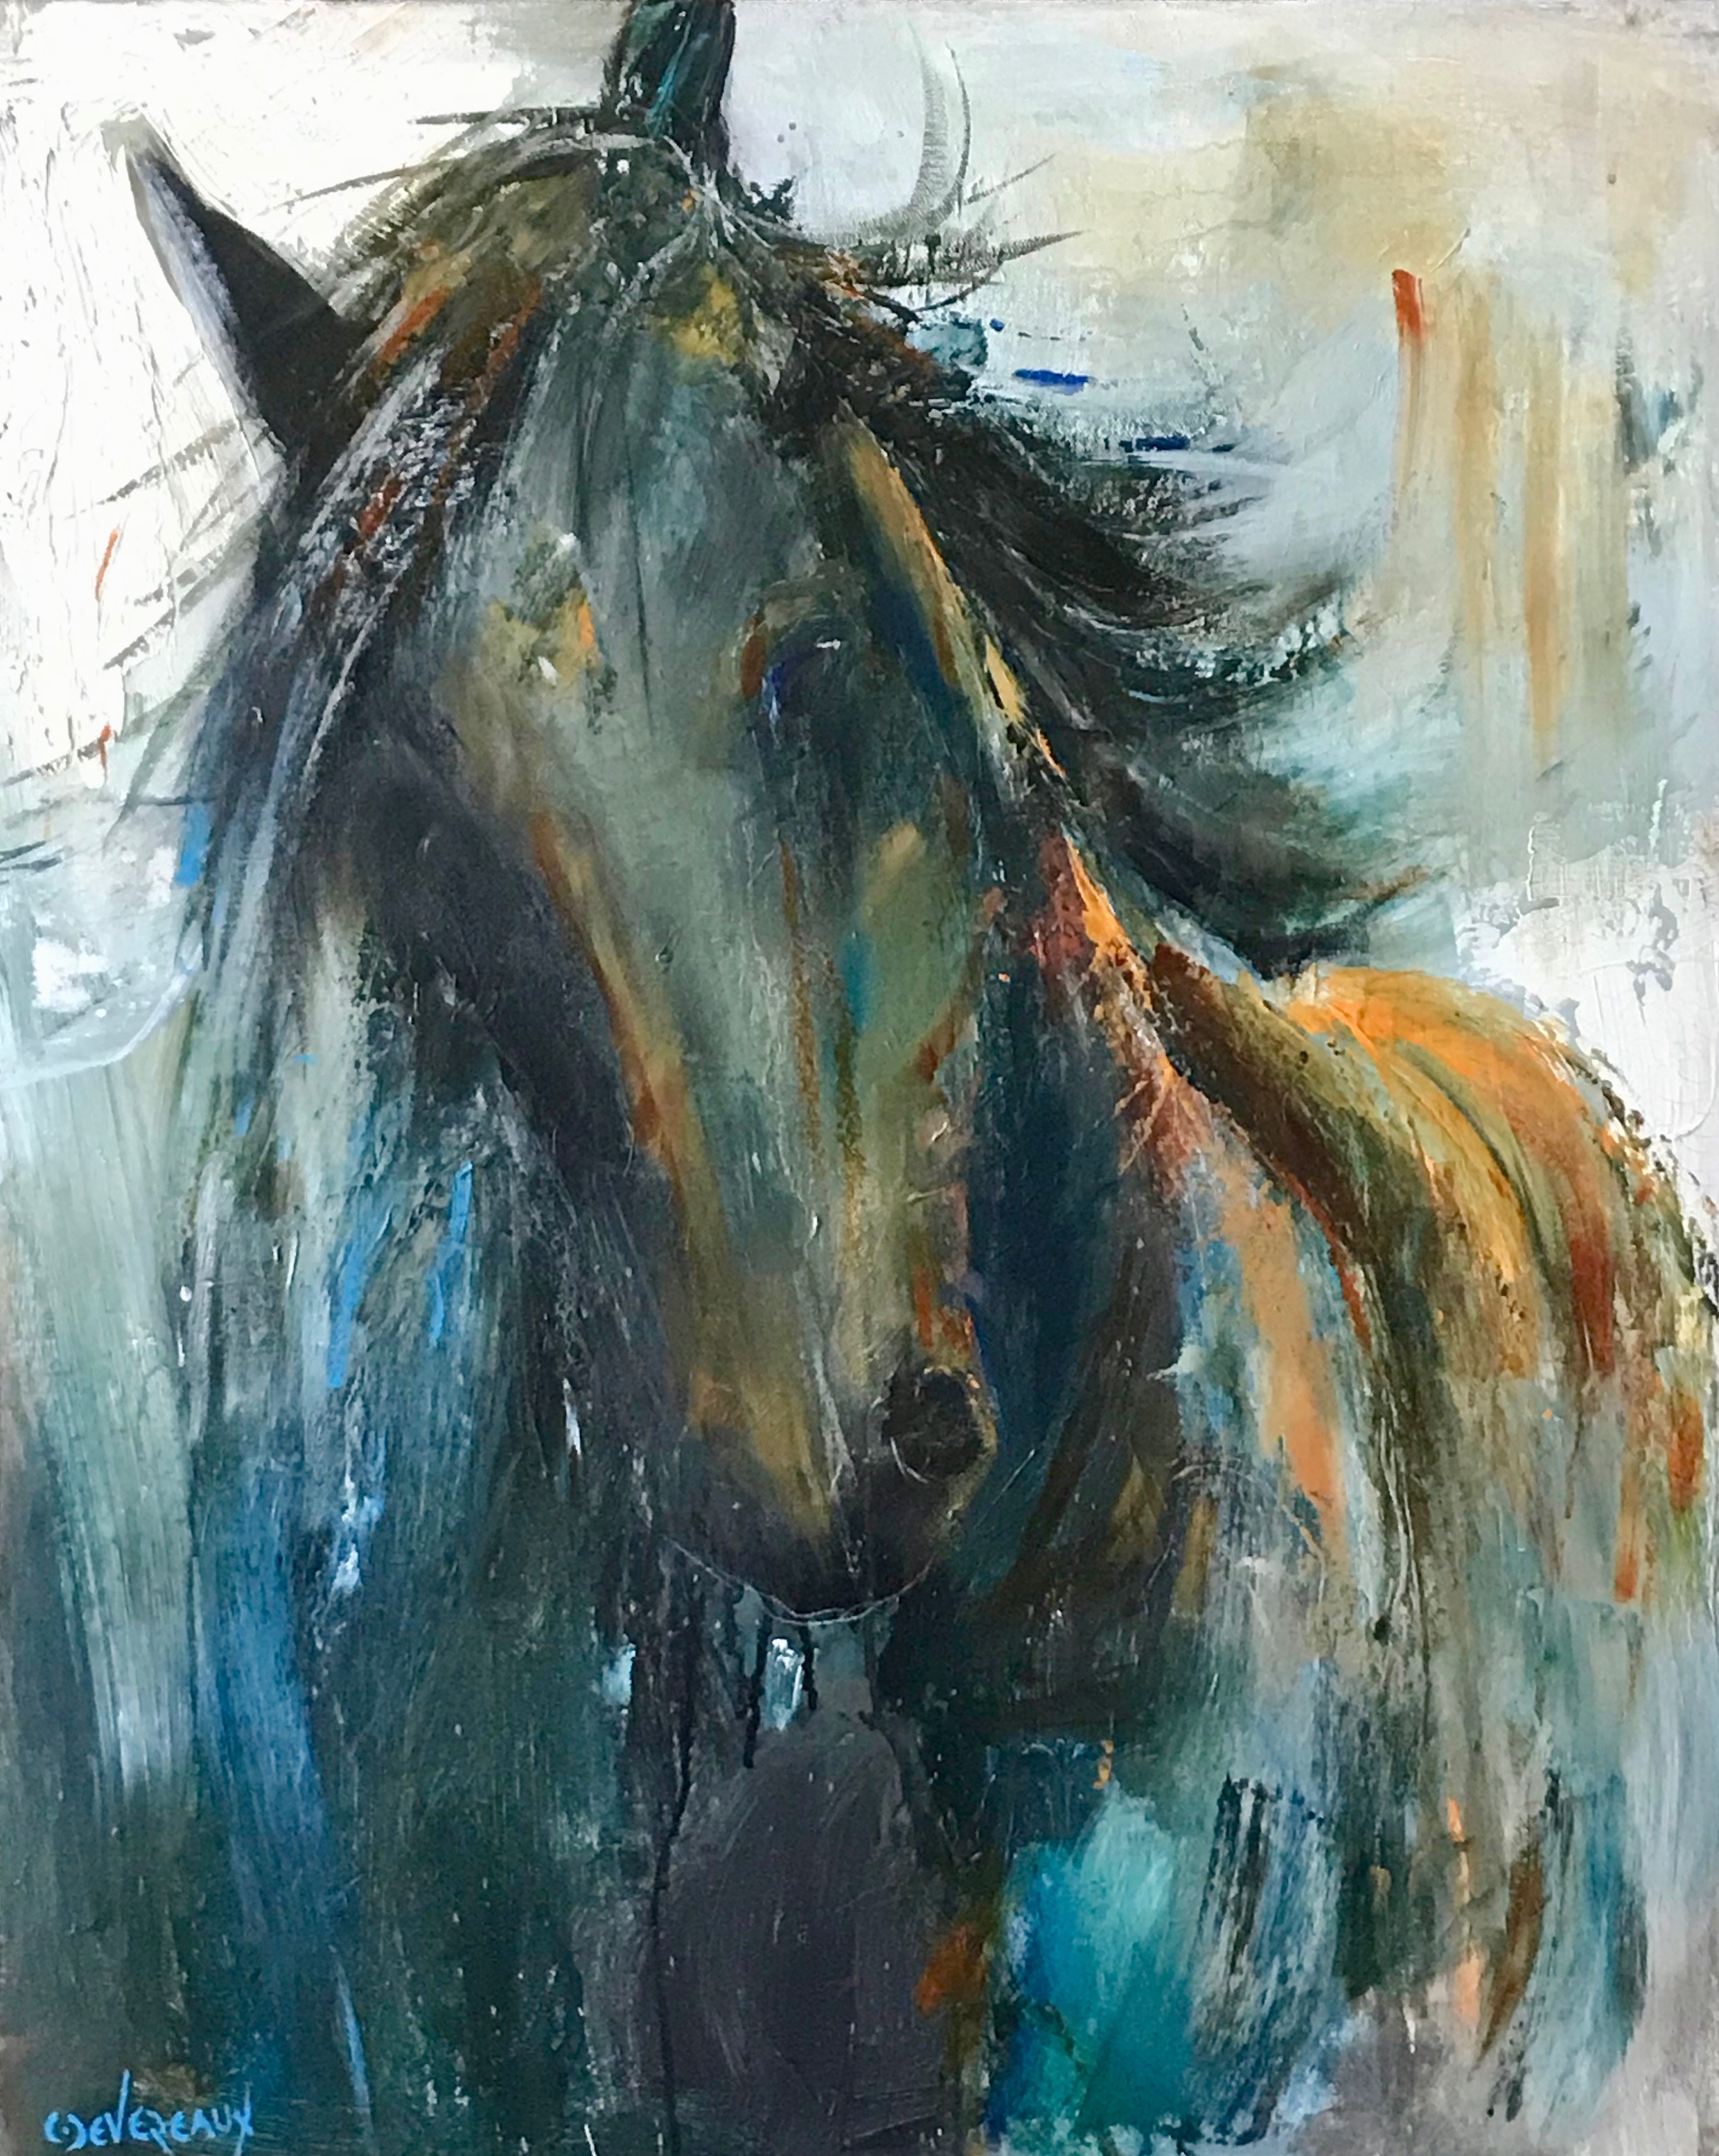 'Splash' 24x30 in  contemporary modern equine, horse painting by Cher Devereaux on stretched canvas.